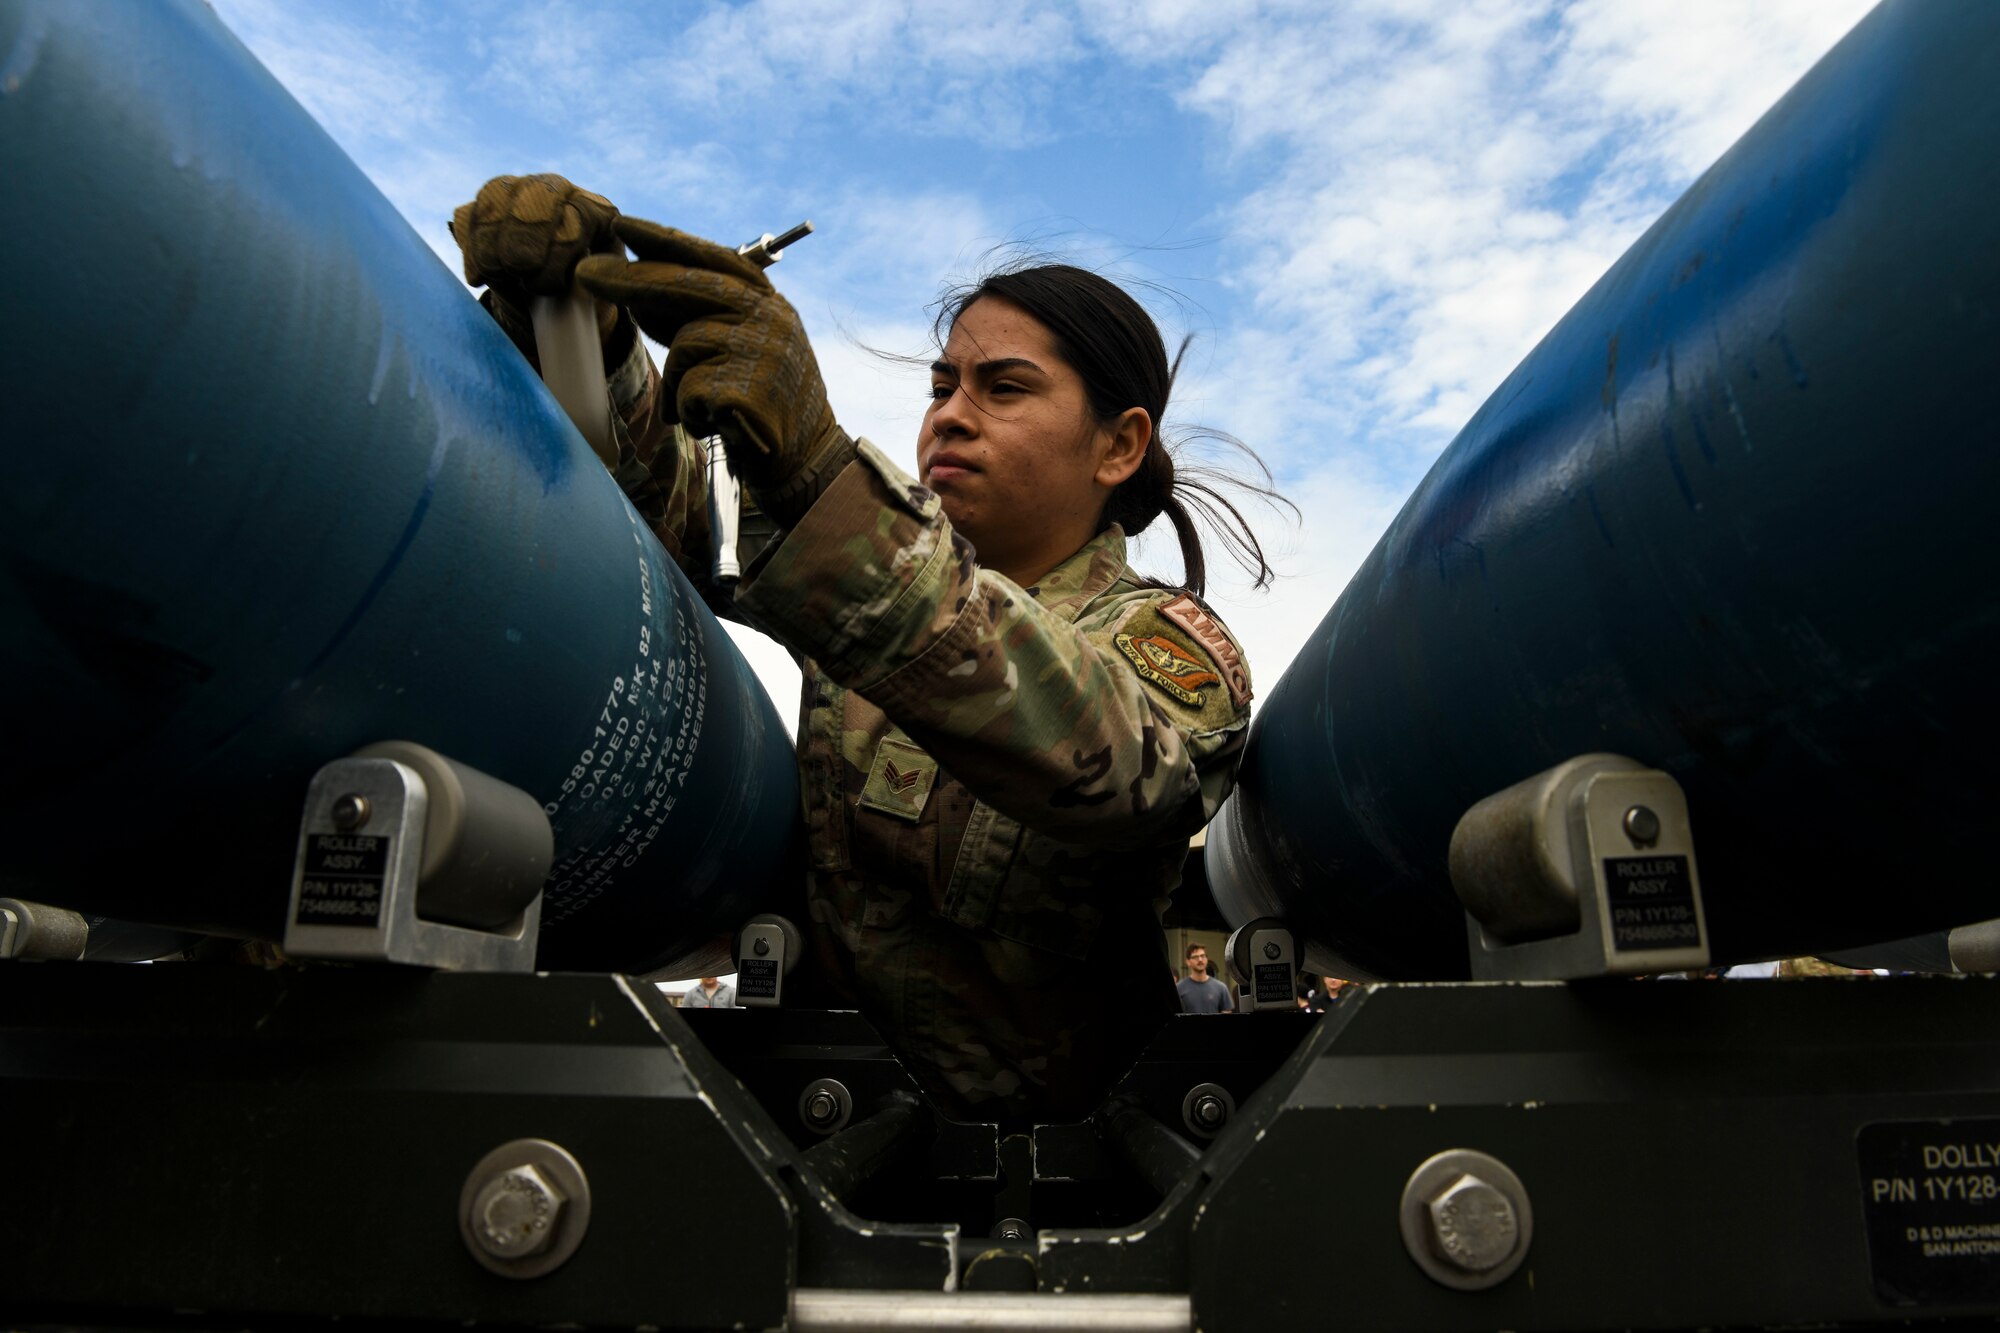 Senior Airman Rosa Valencia, 8th Maintenance Squadron munitions technician, builds a GBU-38 bomb during the Third Quarter Load Crew Competition at Kunsan Air Base, Republic of Korea, Oct. 16, 2021. Munitions technicians had the opportunity to compete against each other in a bomb building competition. (U.S. Air Force photo by Staff Sgt. Jesenia Landaverde)